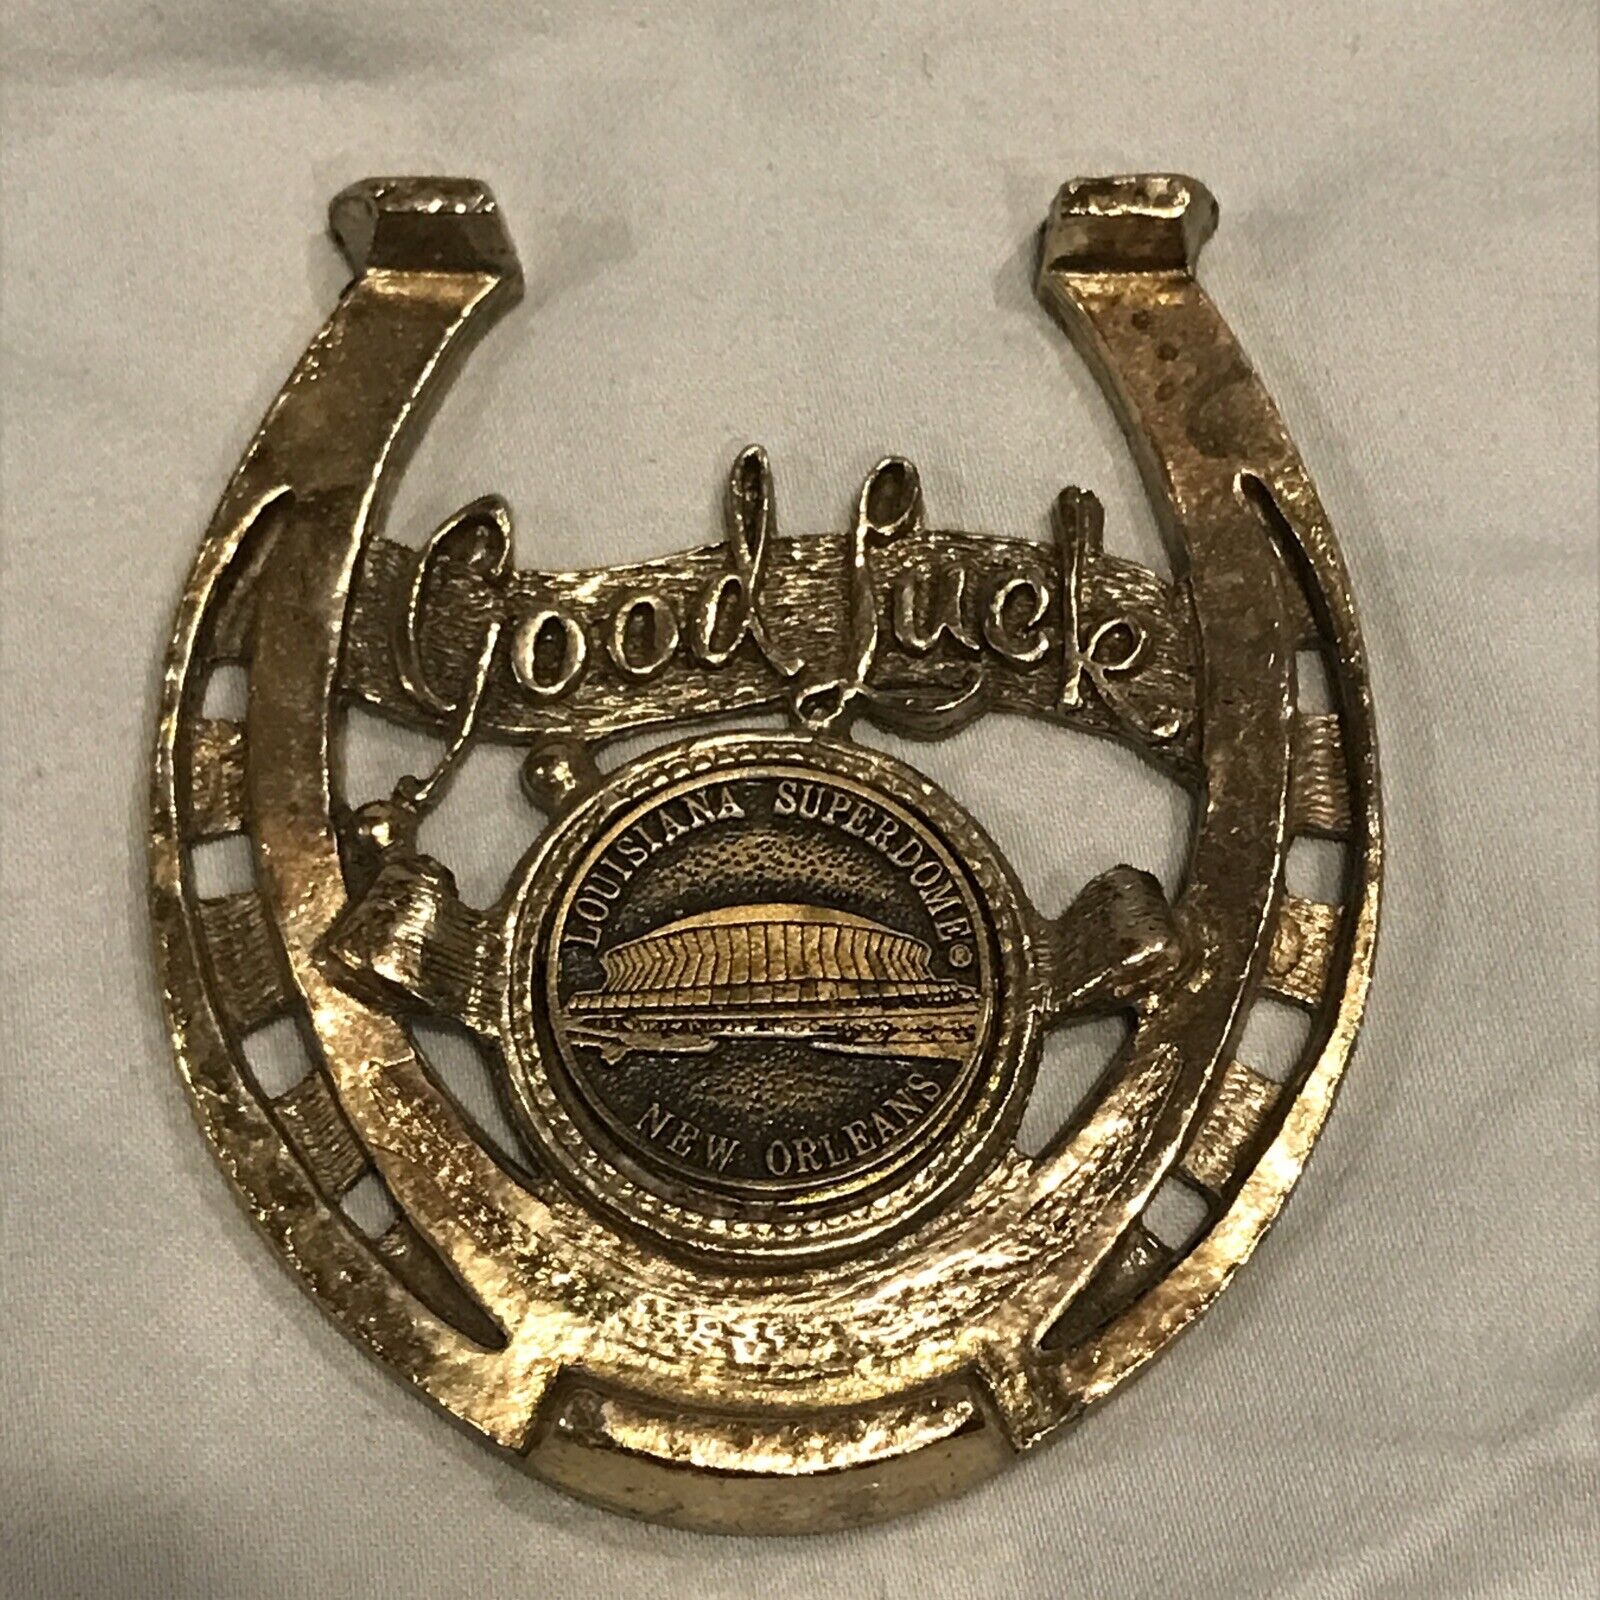 Vintage Good Luck Horseshoe Louisiana superdome new orleans Paper Weight 